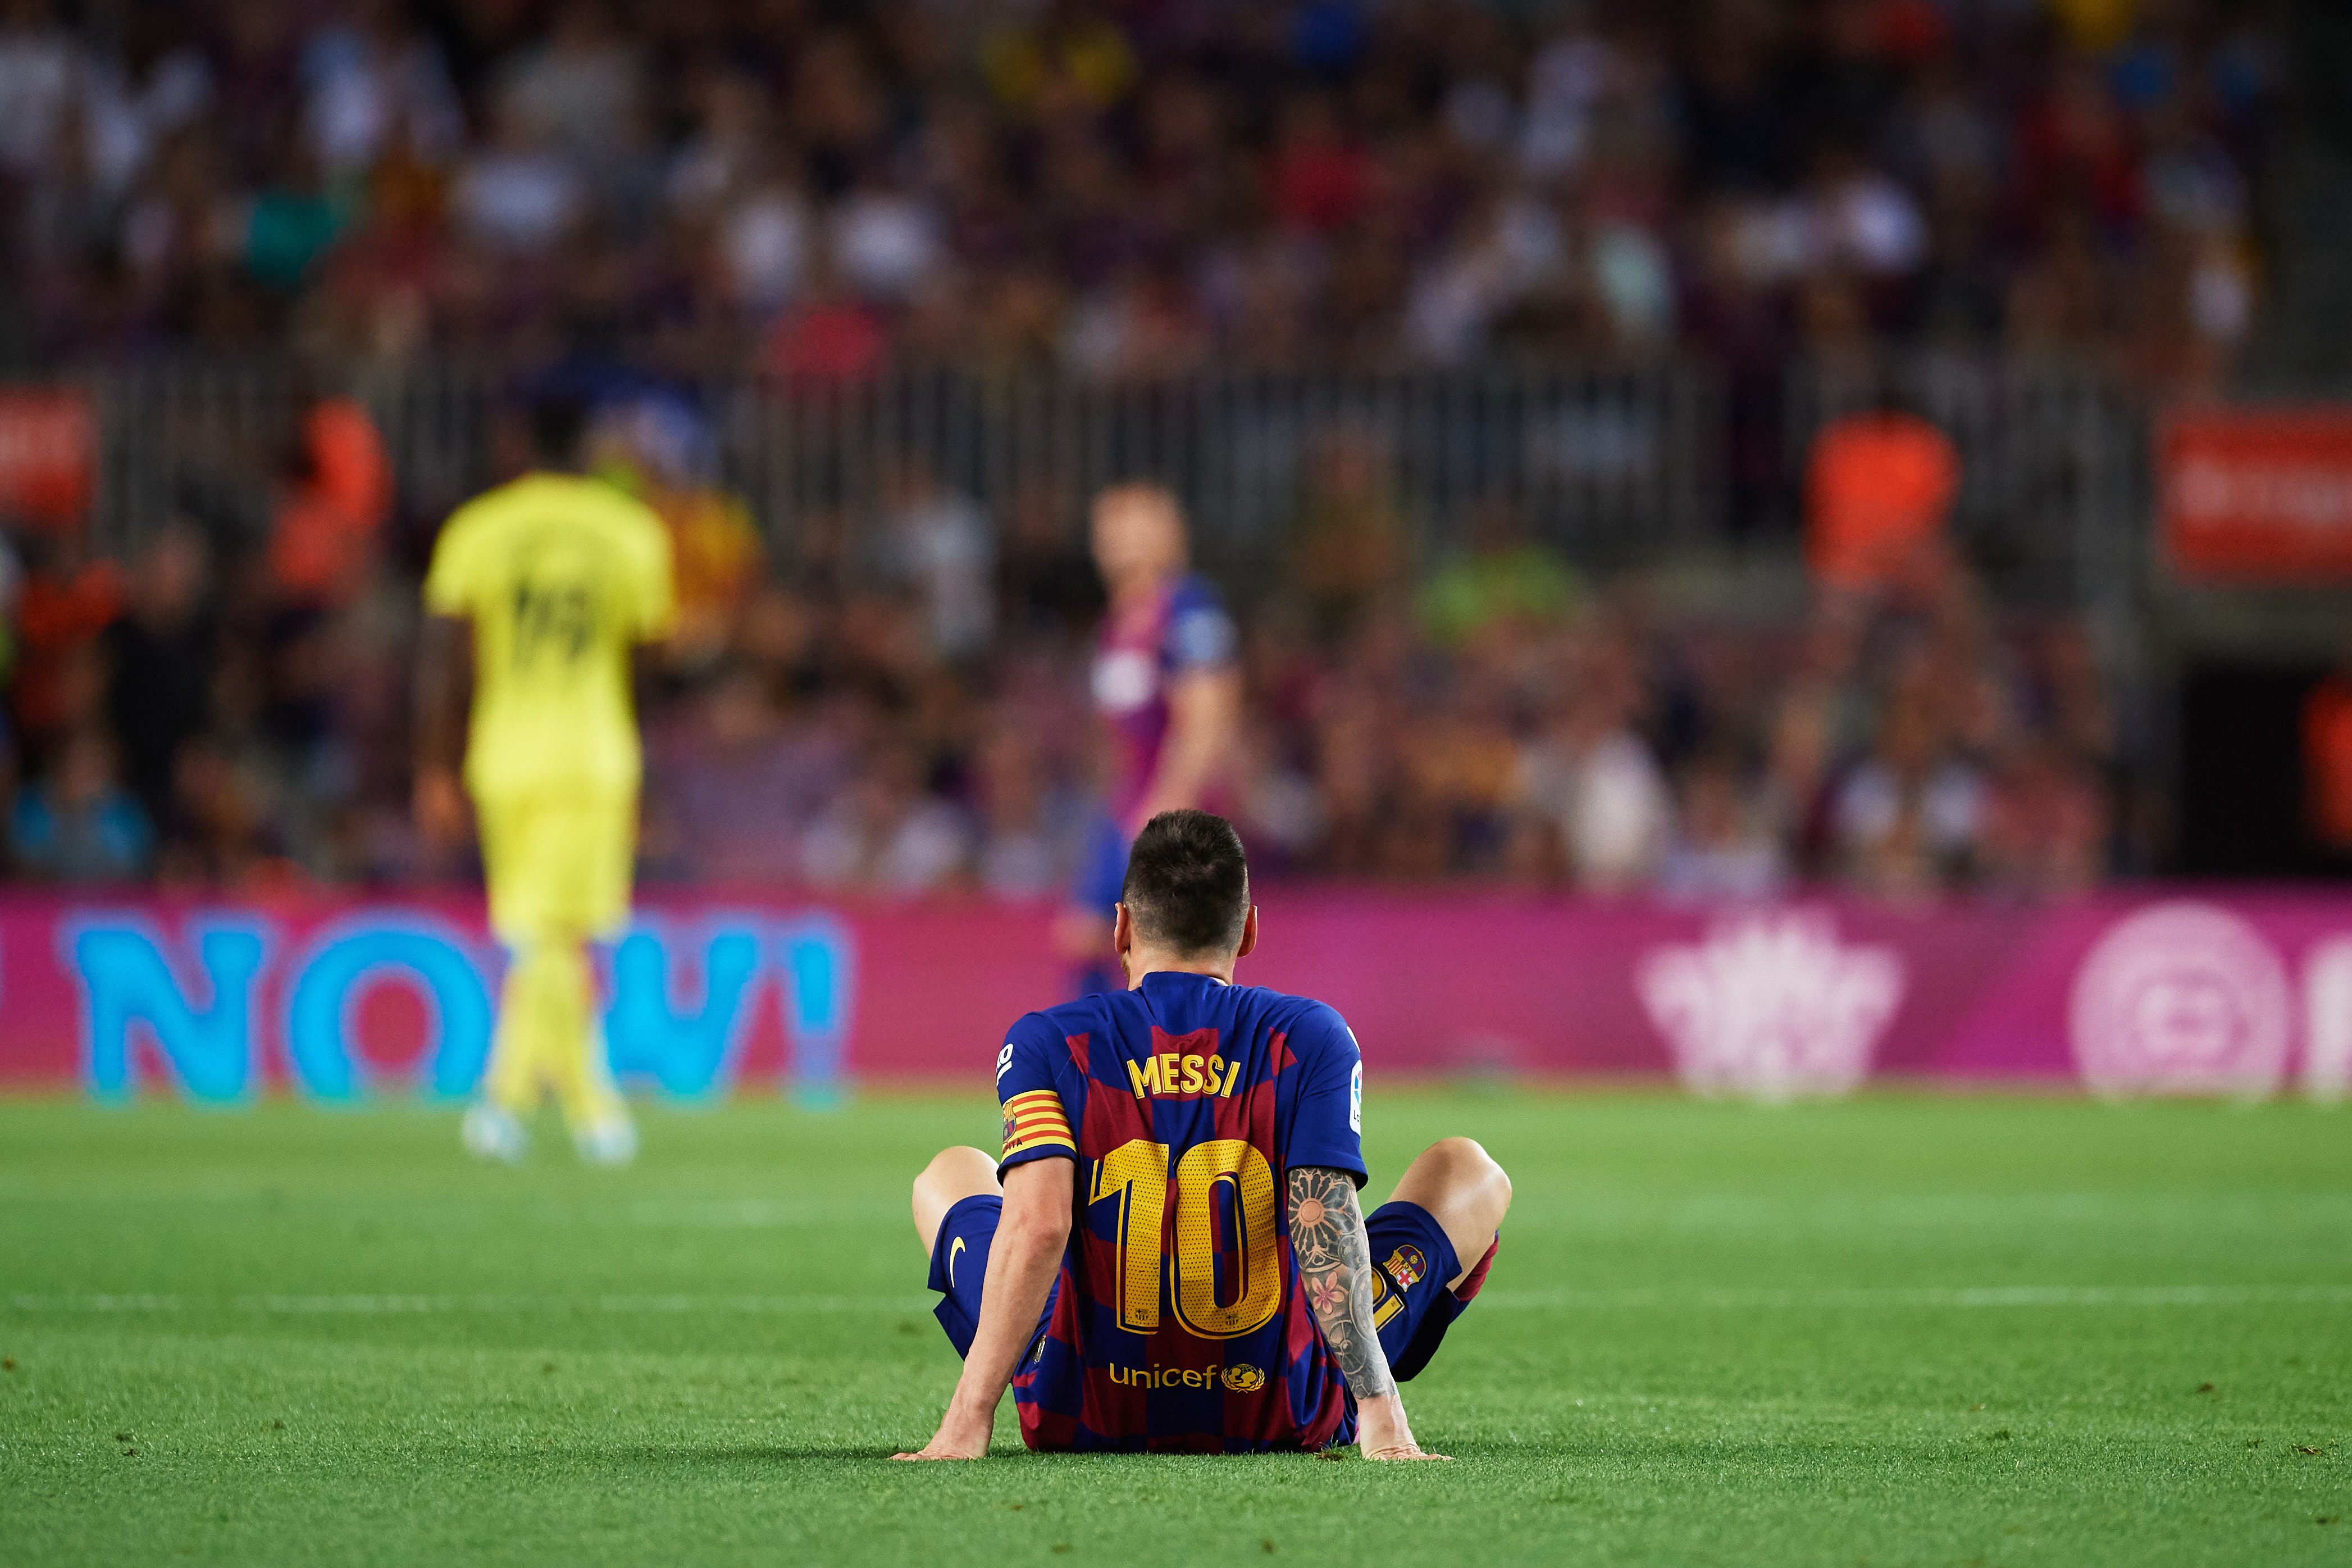 BARCELONA, SPAIN - SEPTEMBER 24: Lionel Messi of FC Barcelona lays on the pitch during the Liga match between FC Barcelona and Villarreal CF at Camp Nou on September 24, 2019 in Barcelona, Spain. (Photo by Alex Caparros/Getty Images)